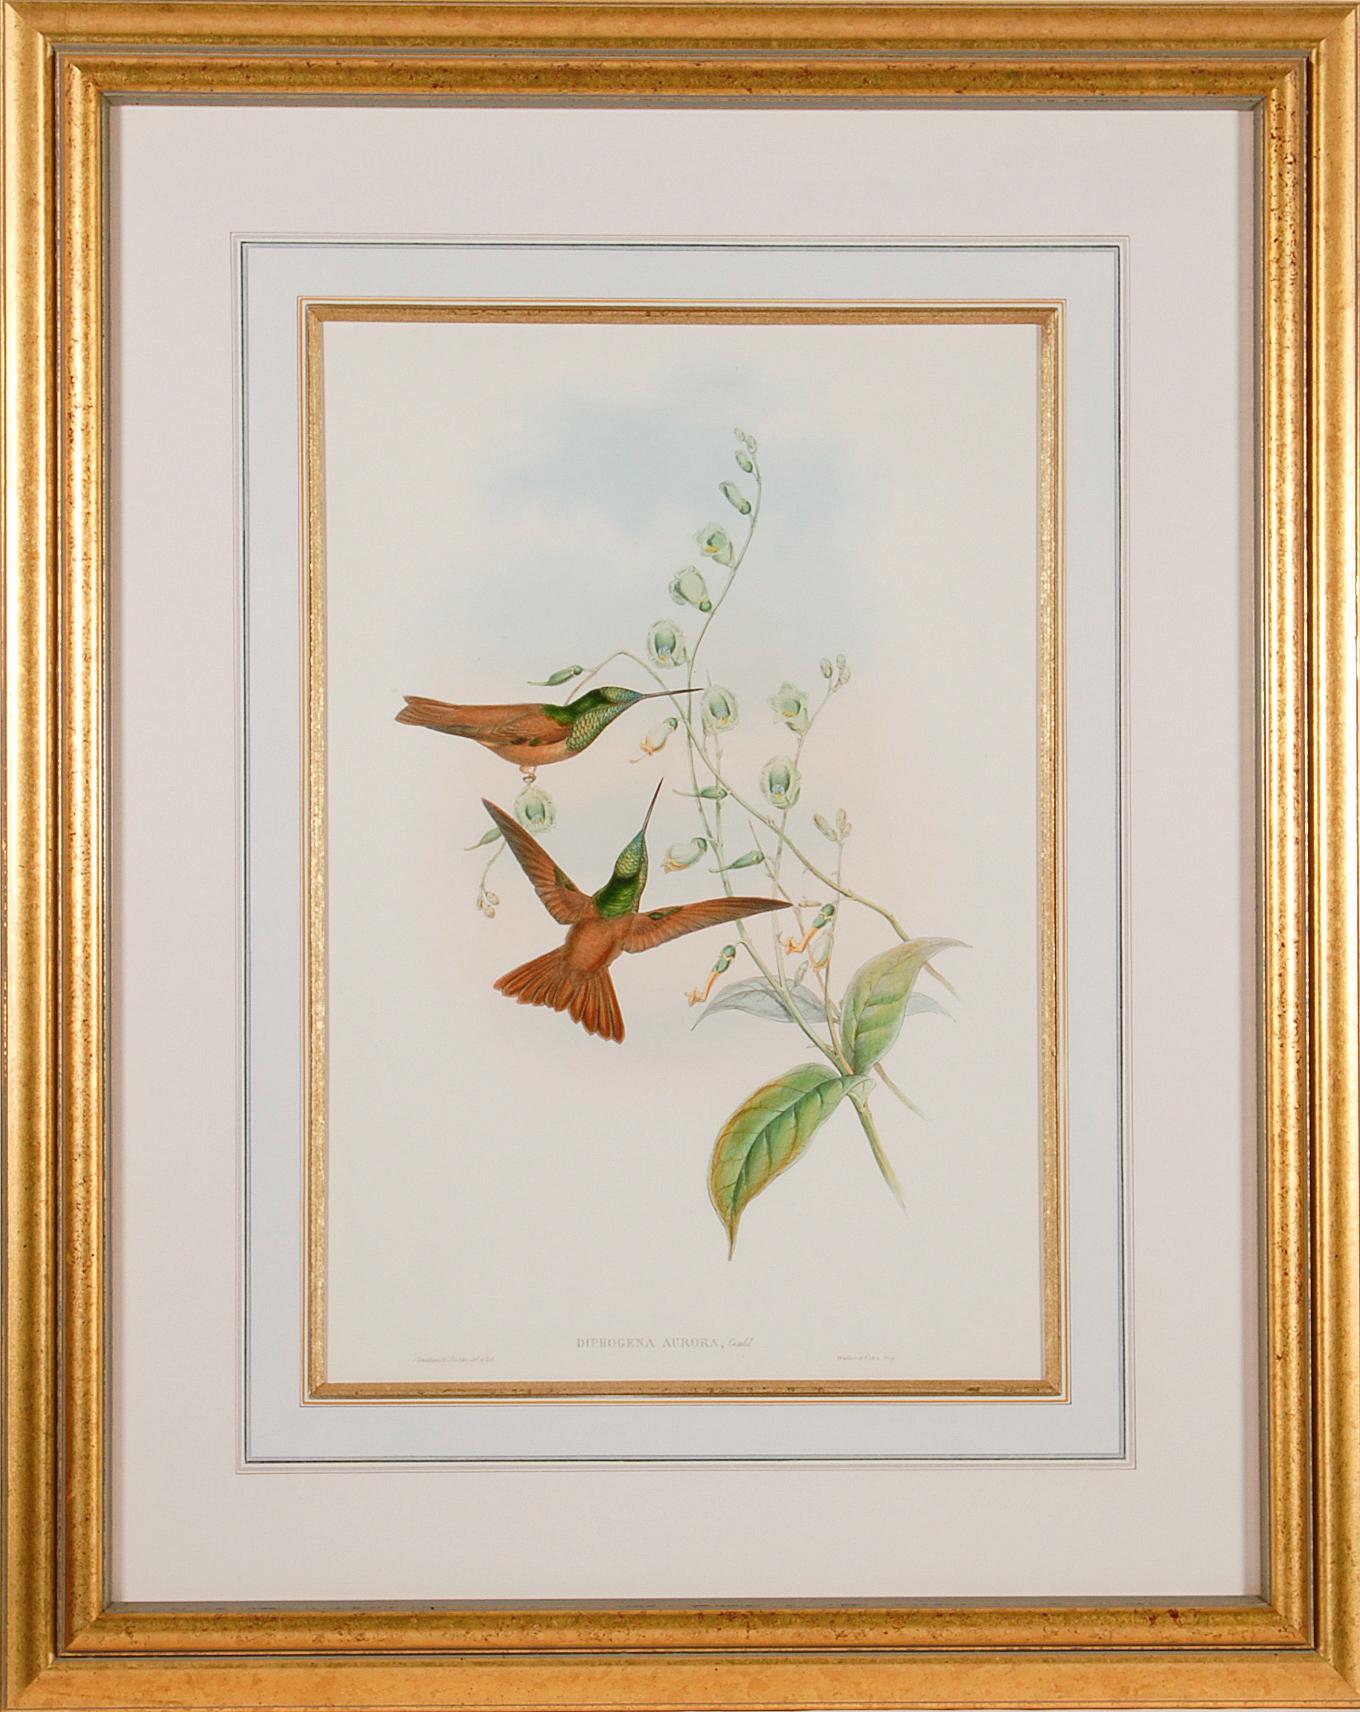 Bolivian Rainbow Hummingbirds: A Framed 19th C. Hand-colored Lithograph by Gould